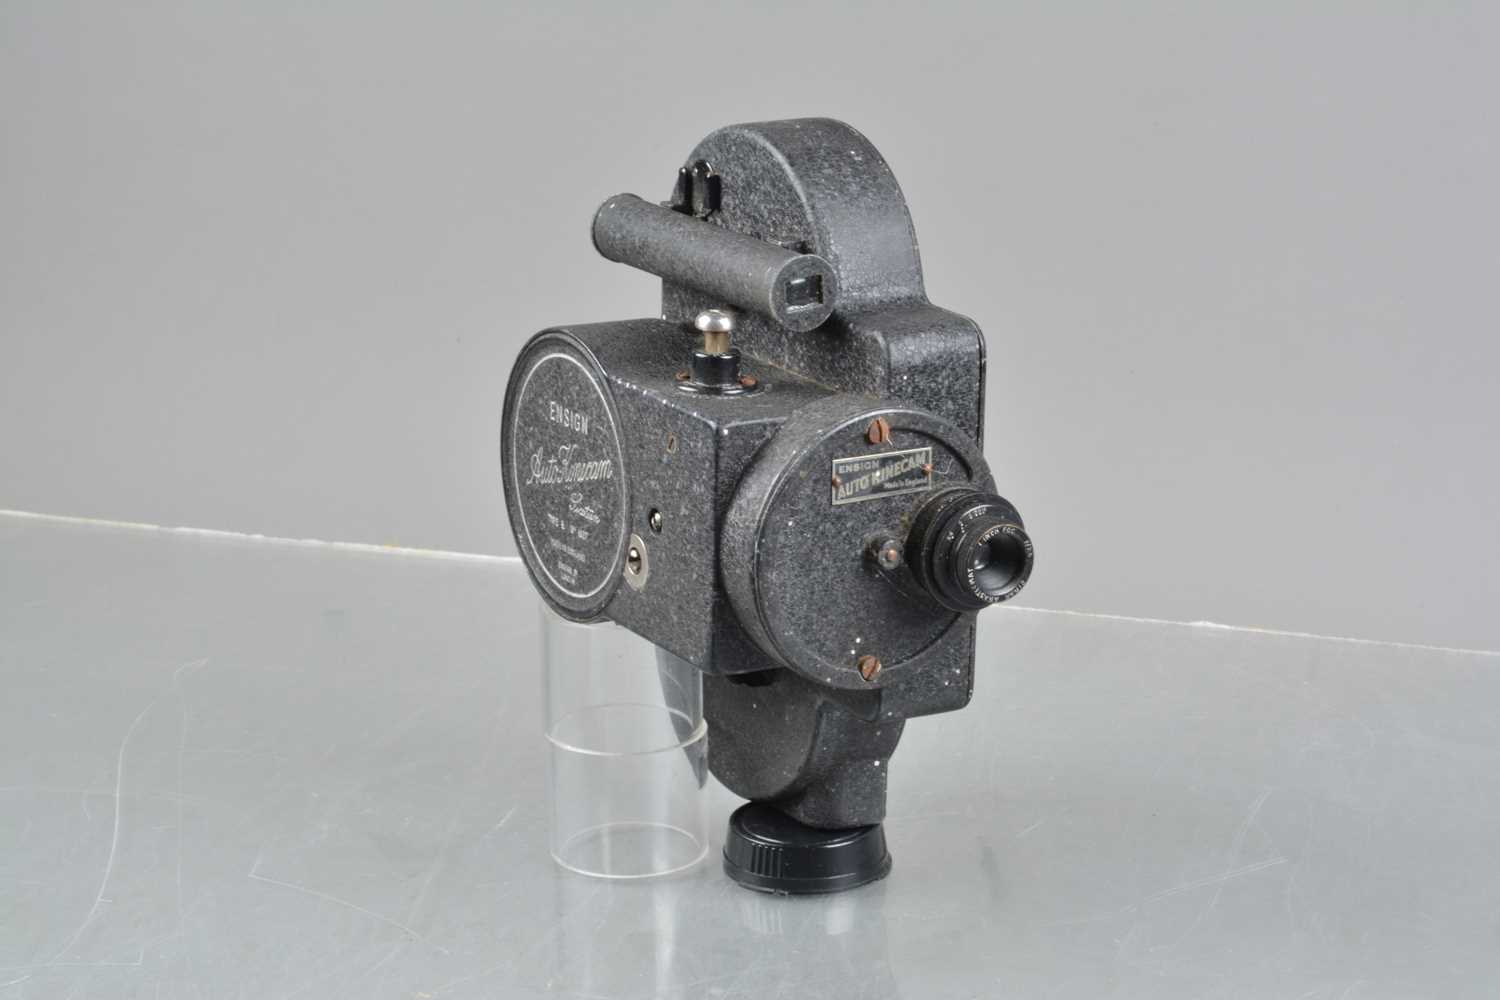 Lot 334 - An Ensign 16mm Type B Auto Kinecam Camera